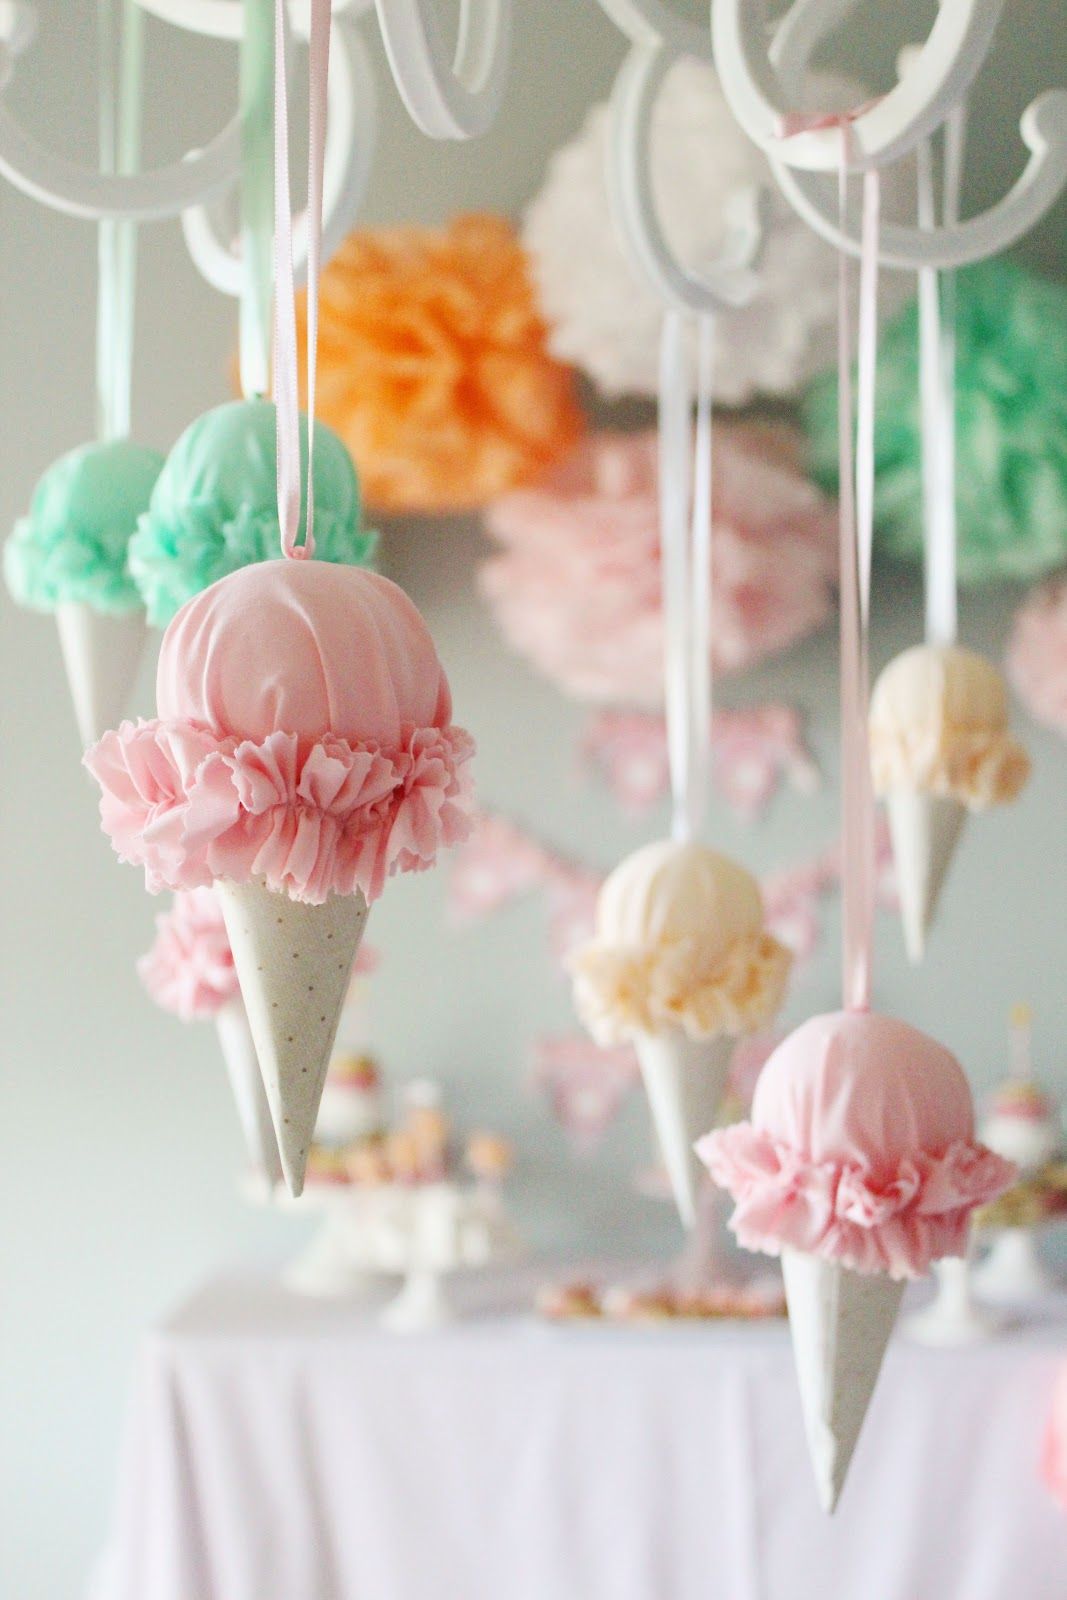 DIY Ruffled Ice Cream Cone ornaments for a party